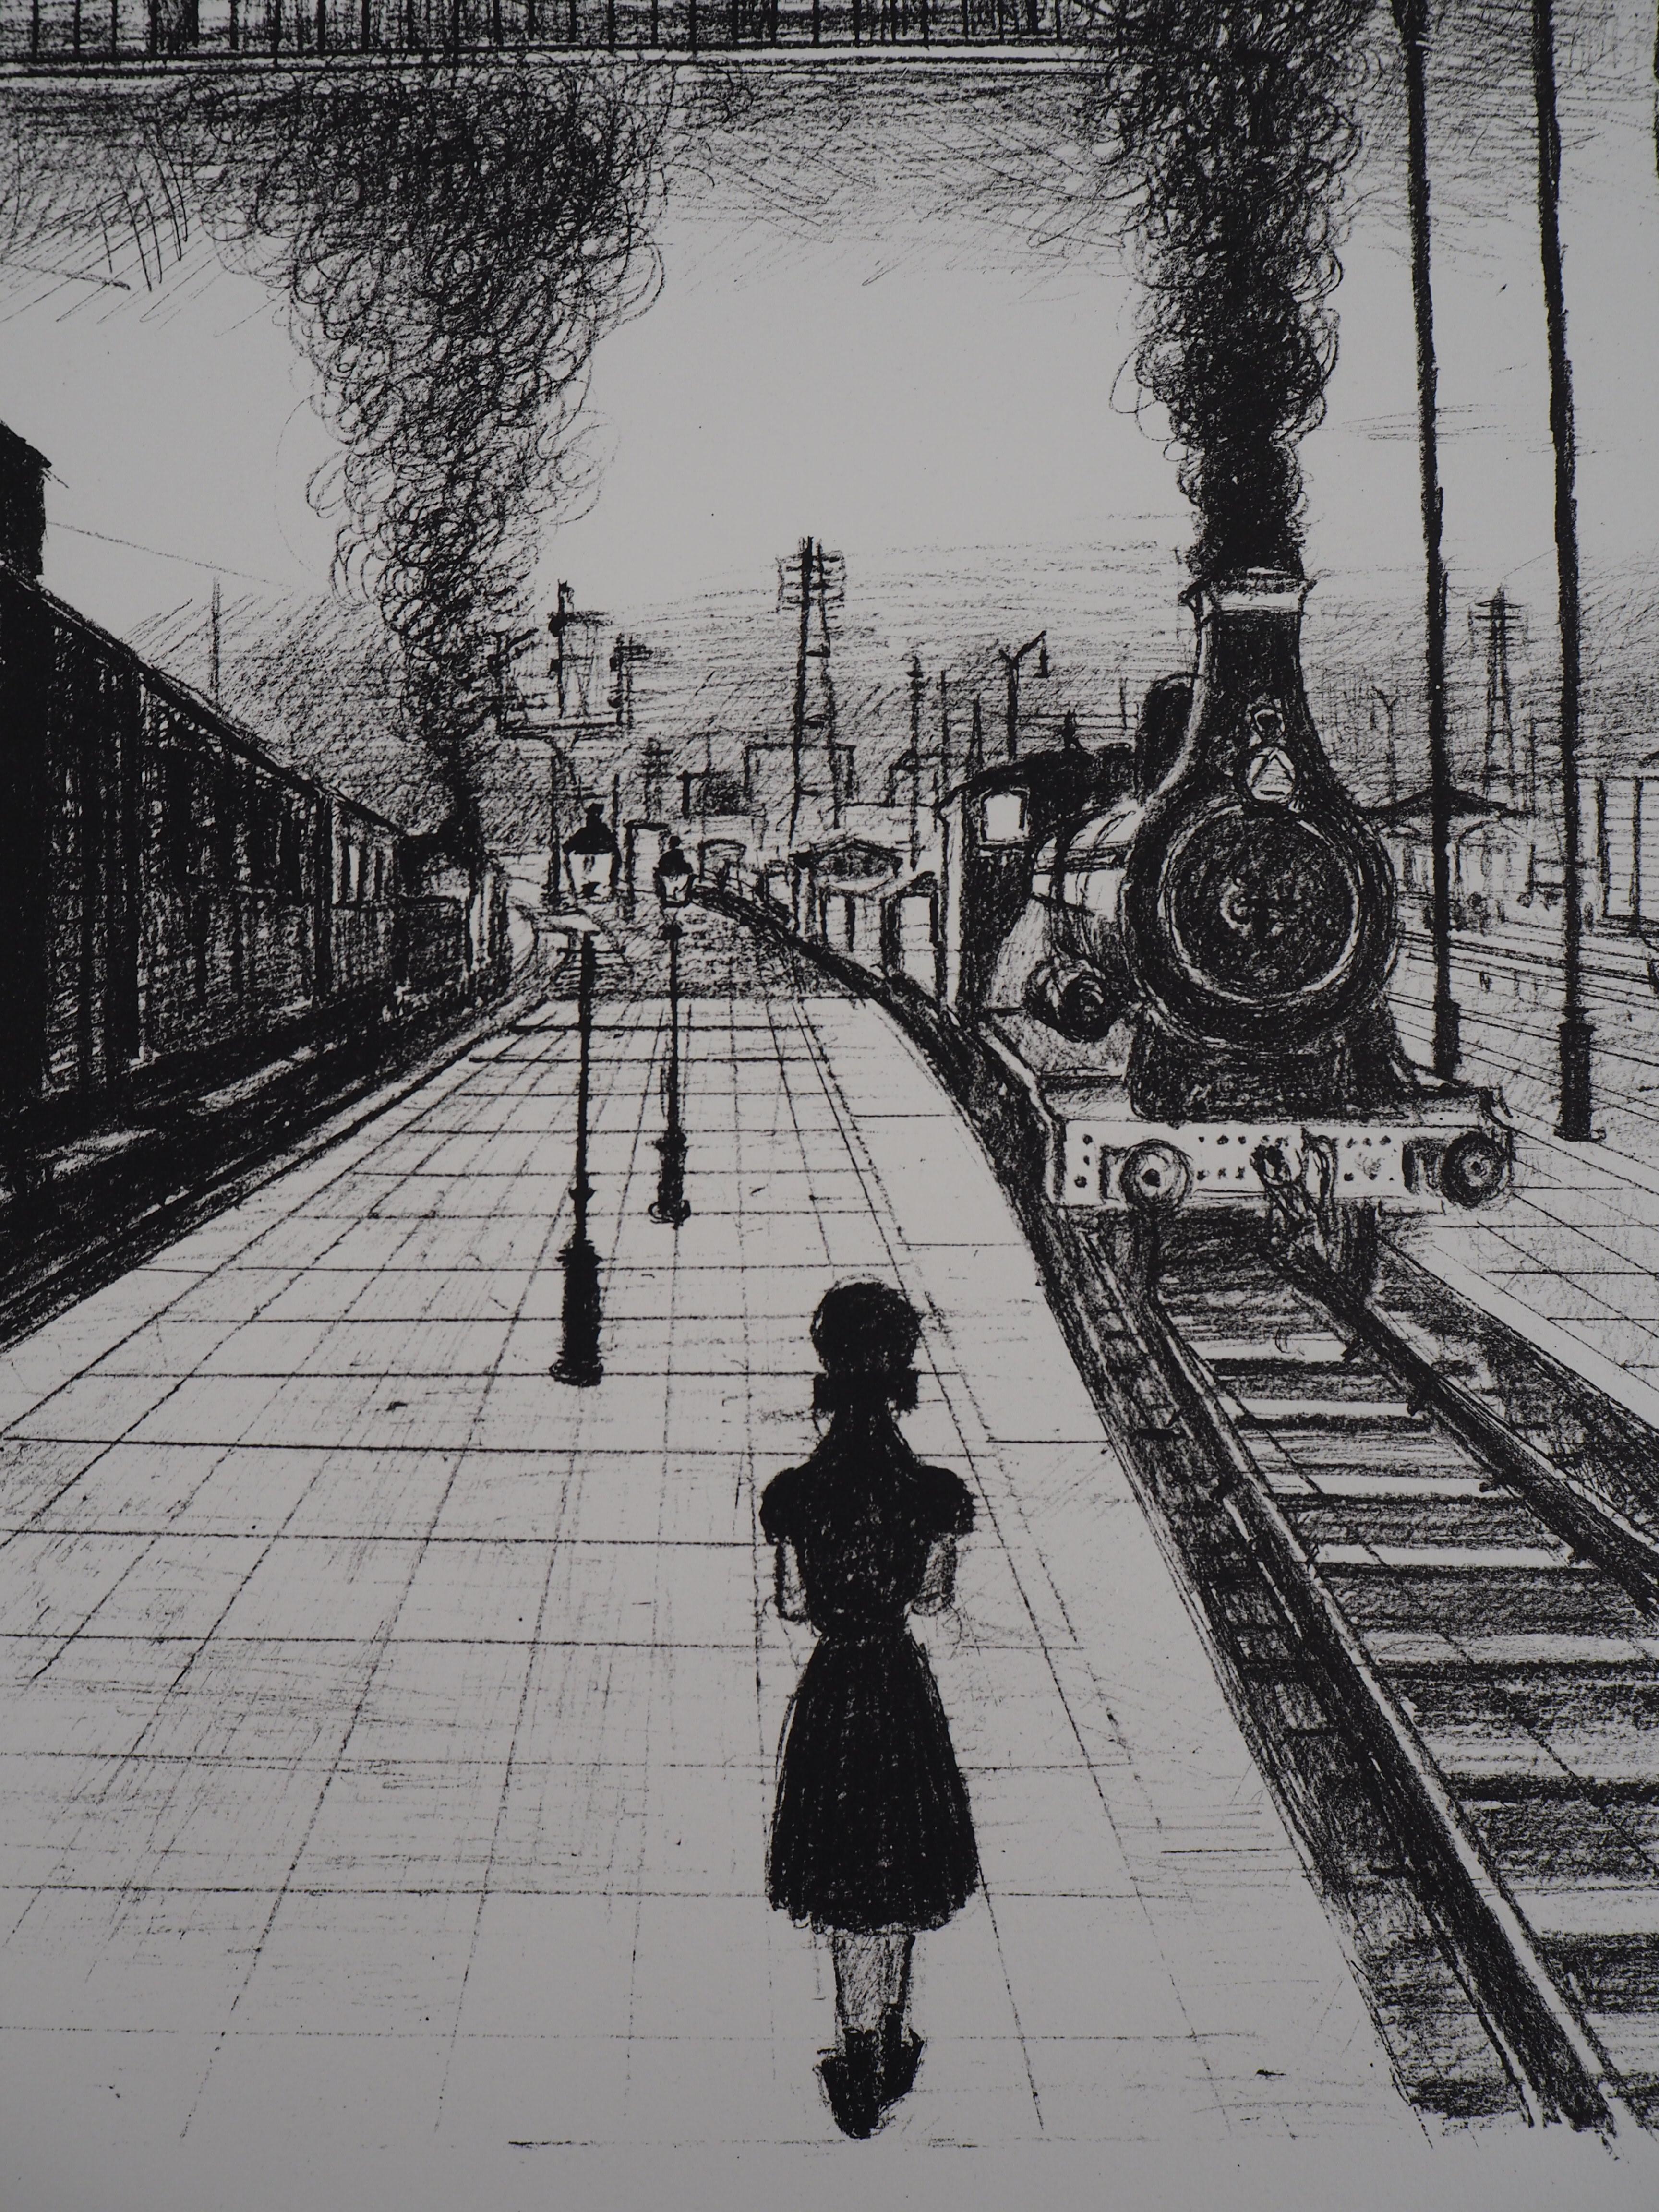 The Train Station - Original signed lithograph - 1971 - Modern Print by Paul Delvaux